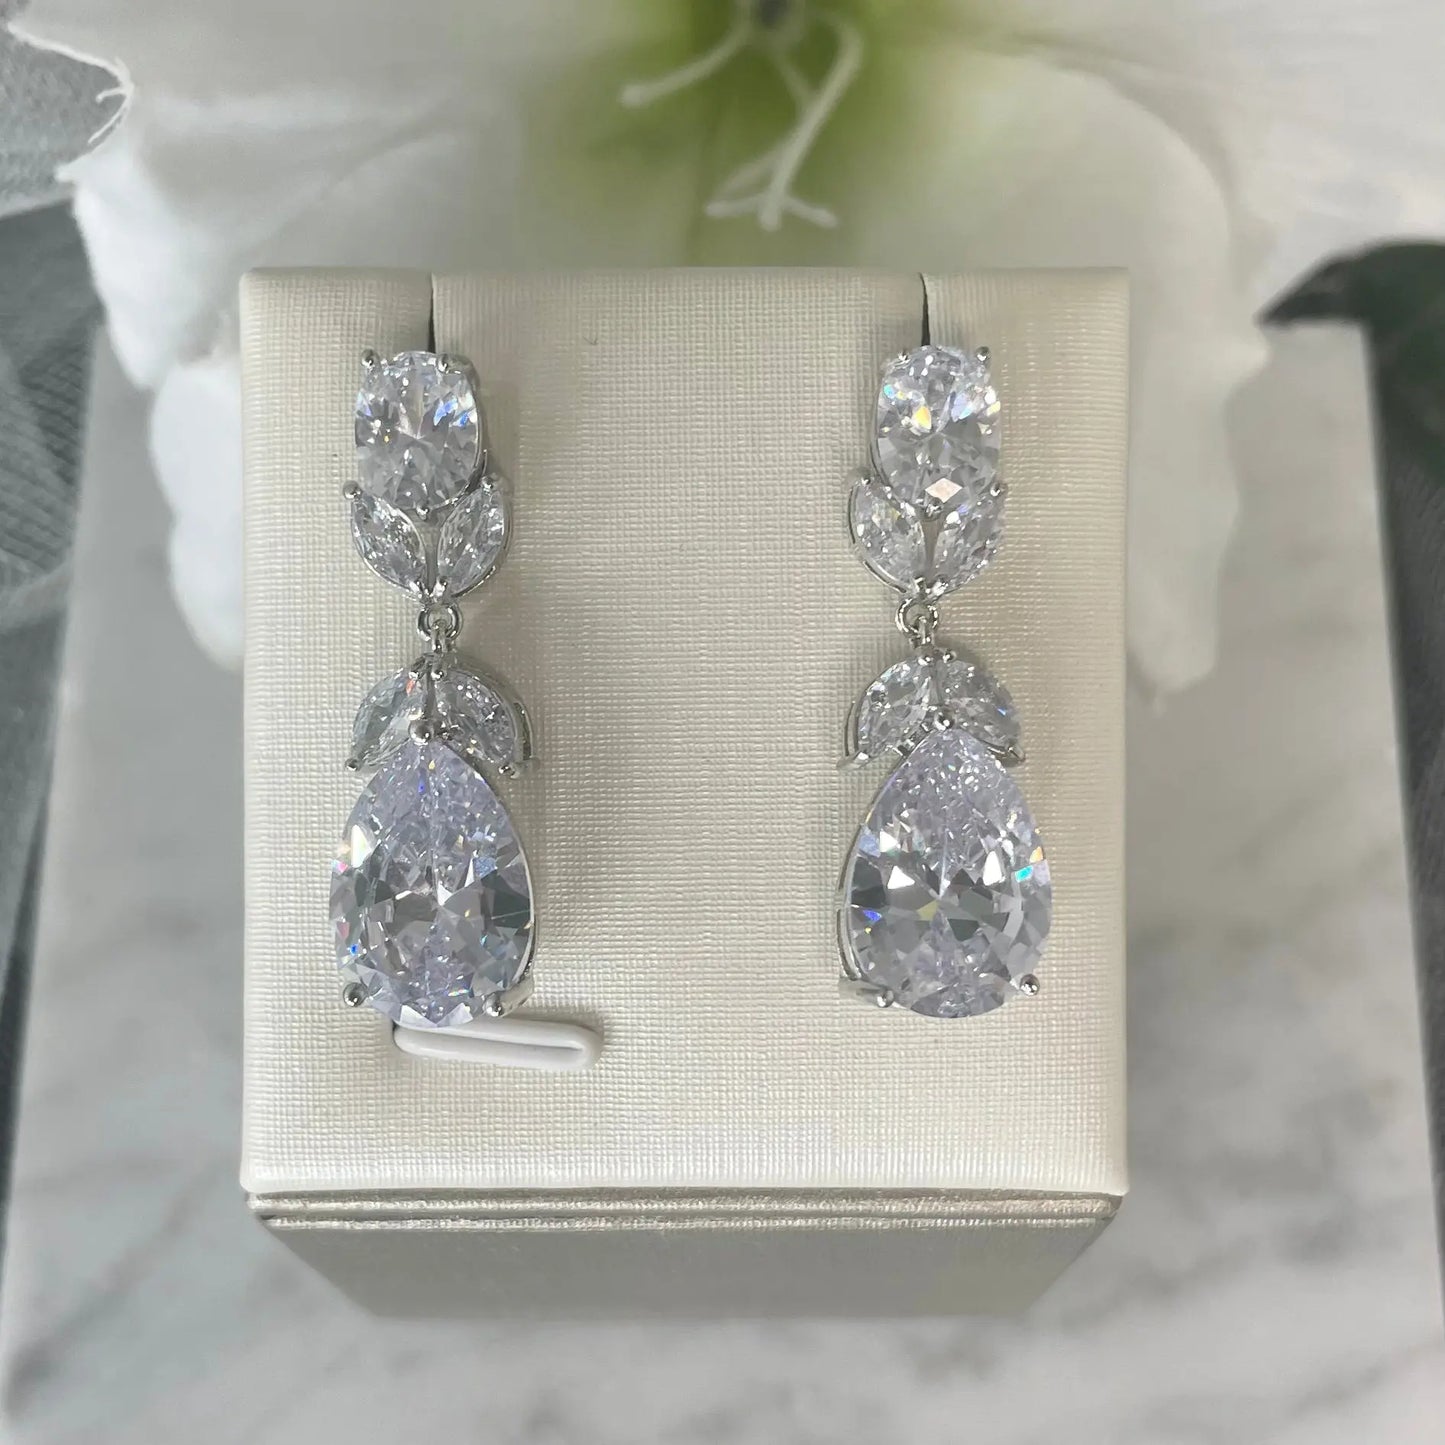 Image of Gigi crystal earrings showcasing their exquisite design and sparkling crystals.